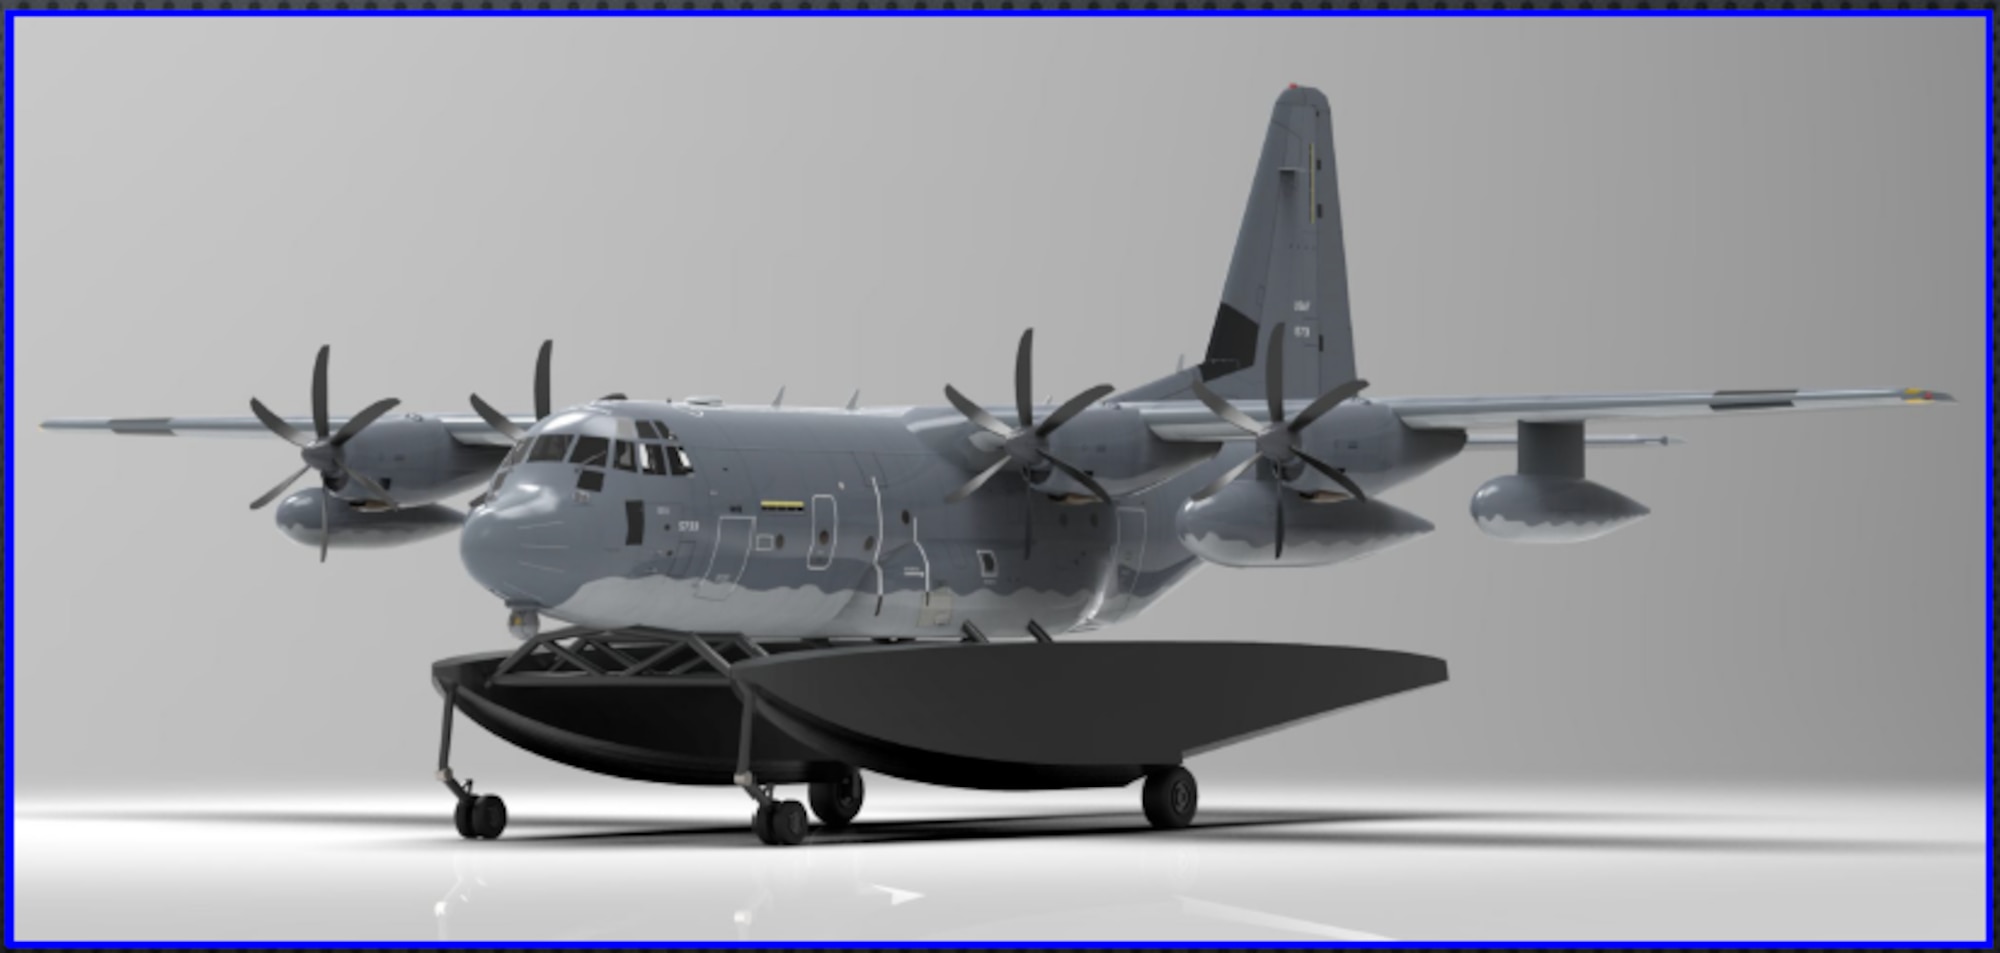 A rendering of a twin float amphibious modification to an MC-130J Commando II is shown here. Air Force Special Operations Command and private sector counterparts are currently developing a Removable Amphibious Float Modification (RAFM) for the MC-130J, allowing aircraft to take off and land in bodies of water and conduct runway independent operations. (Courtesy photo)